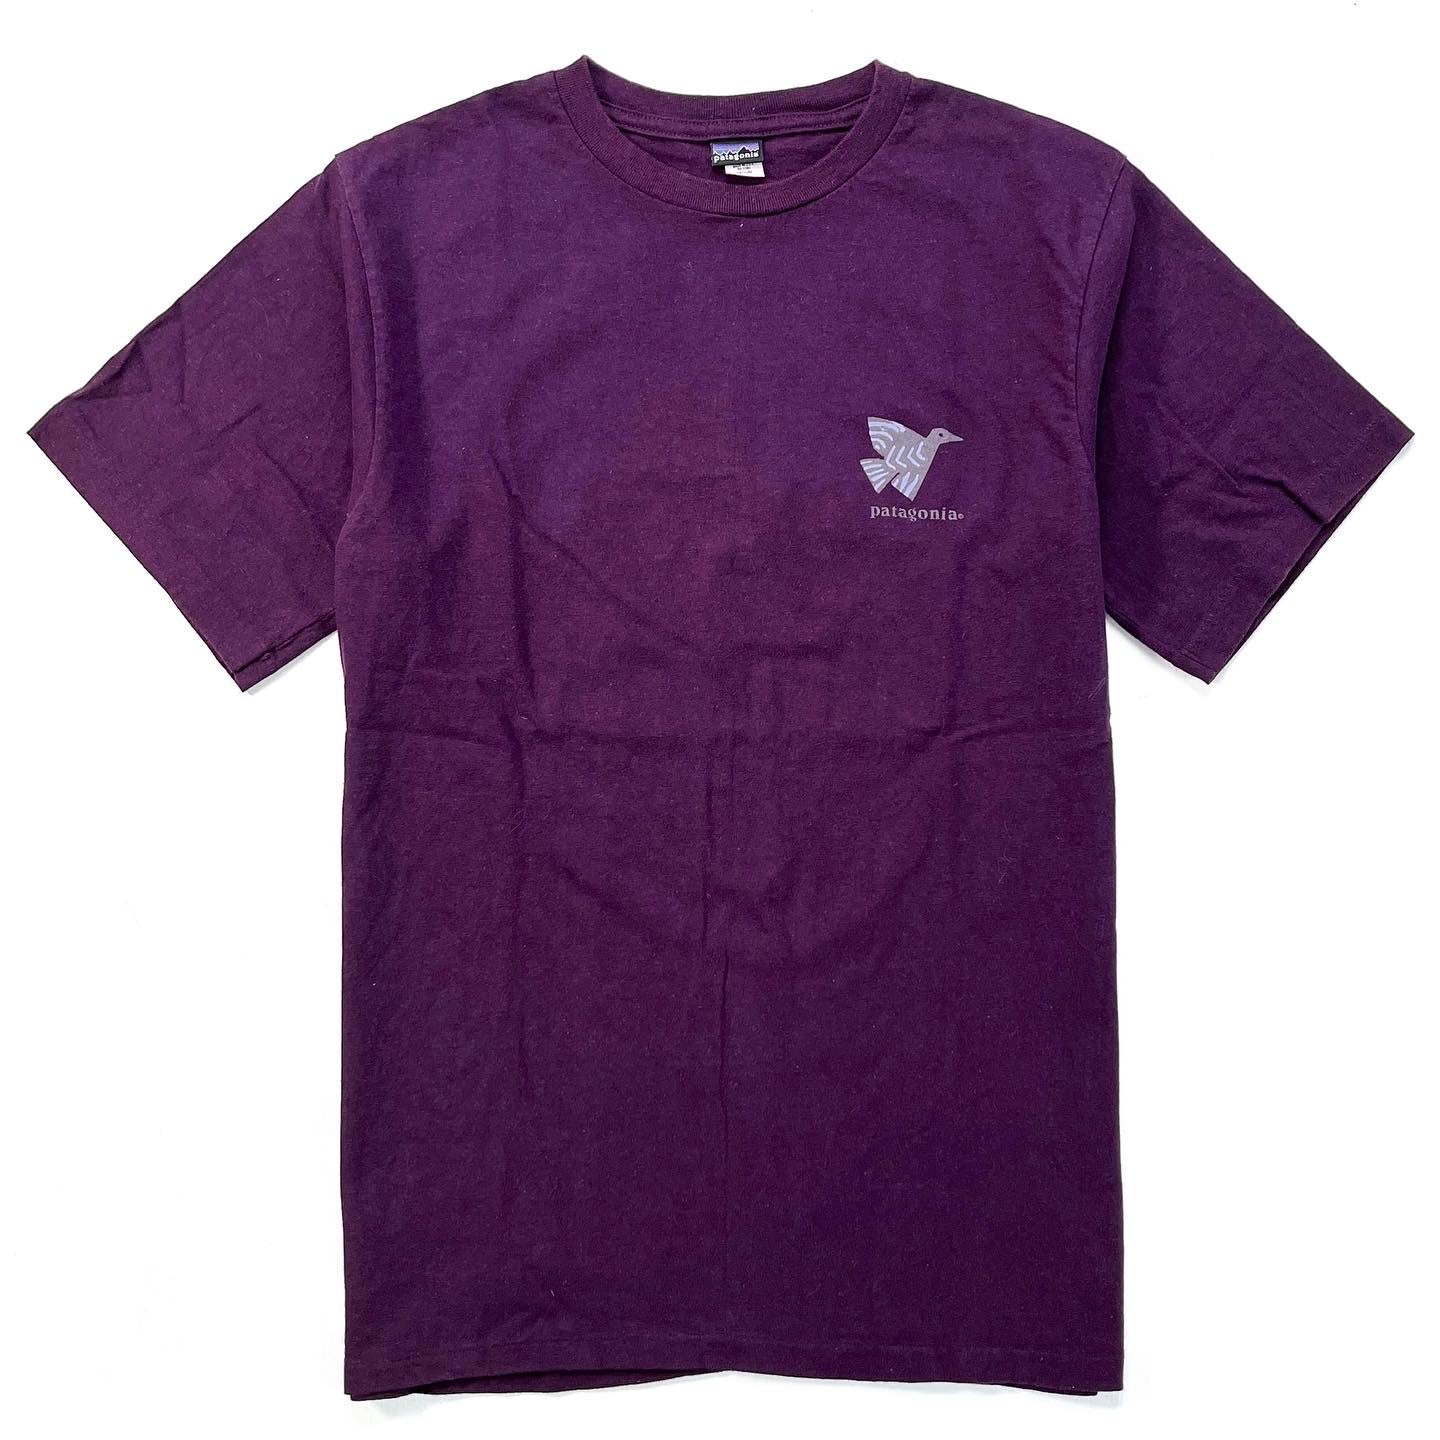 1992 Patagonia Made In The U.S.A. Printed T-Shirt, Dark Purple (S)